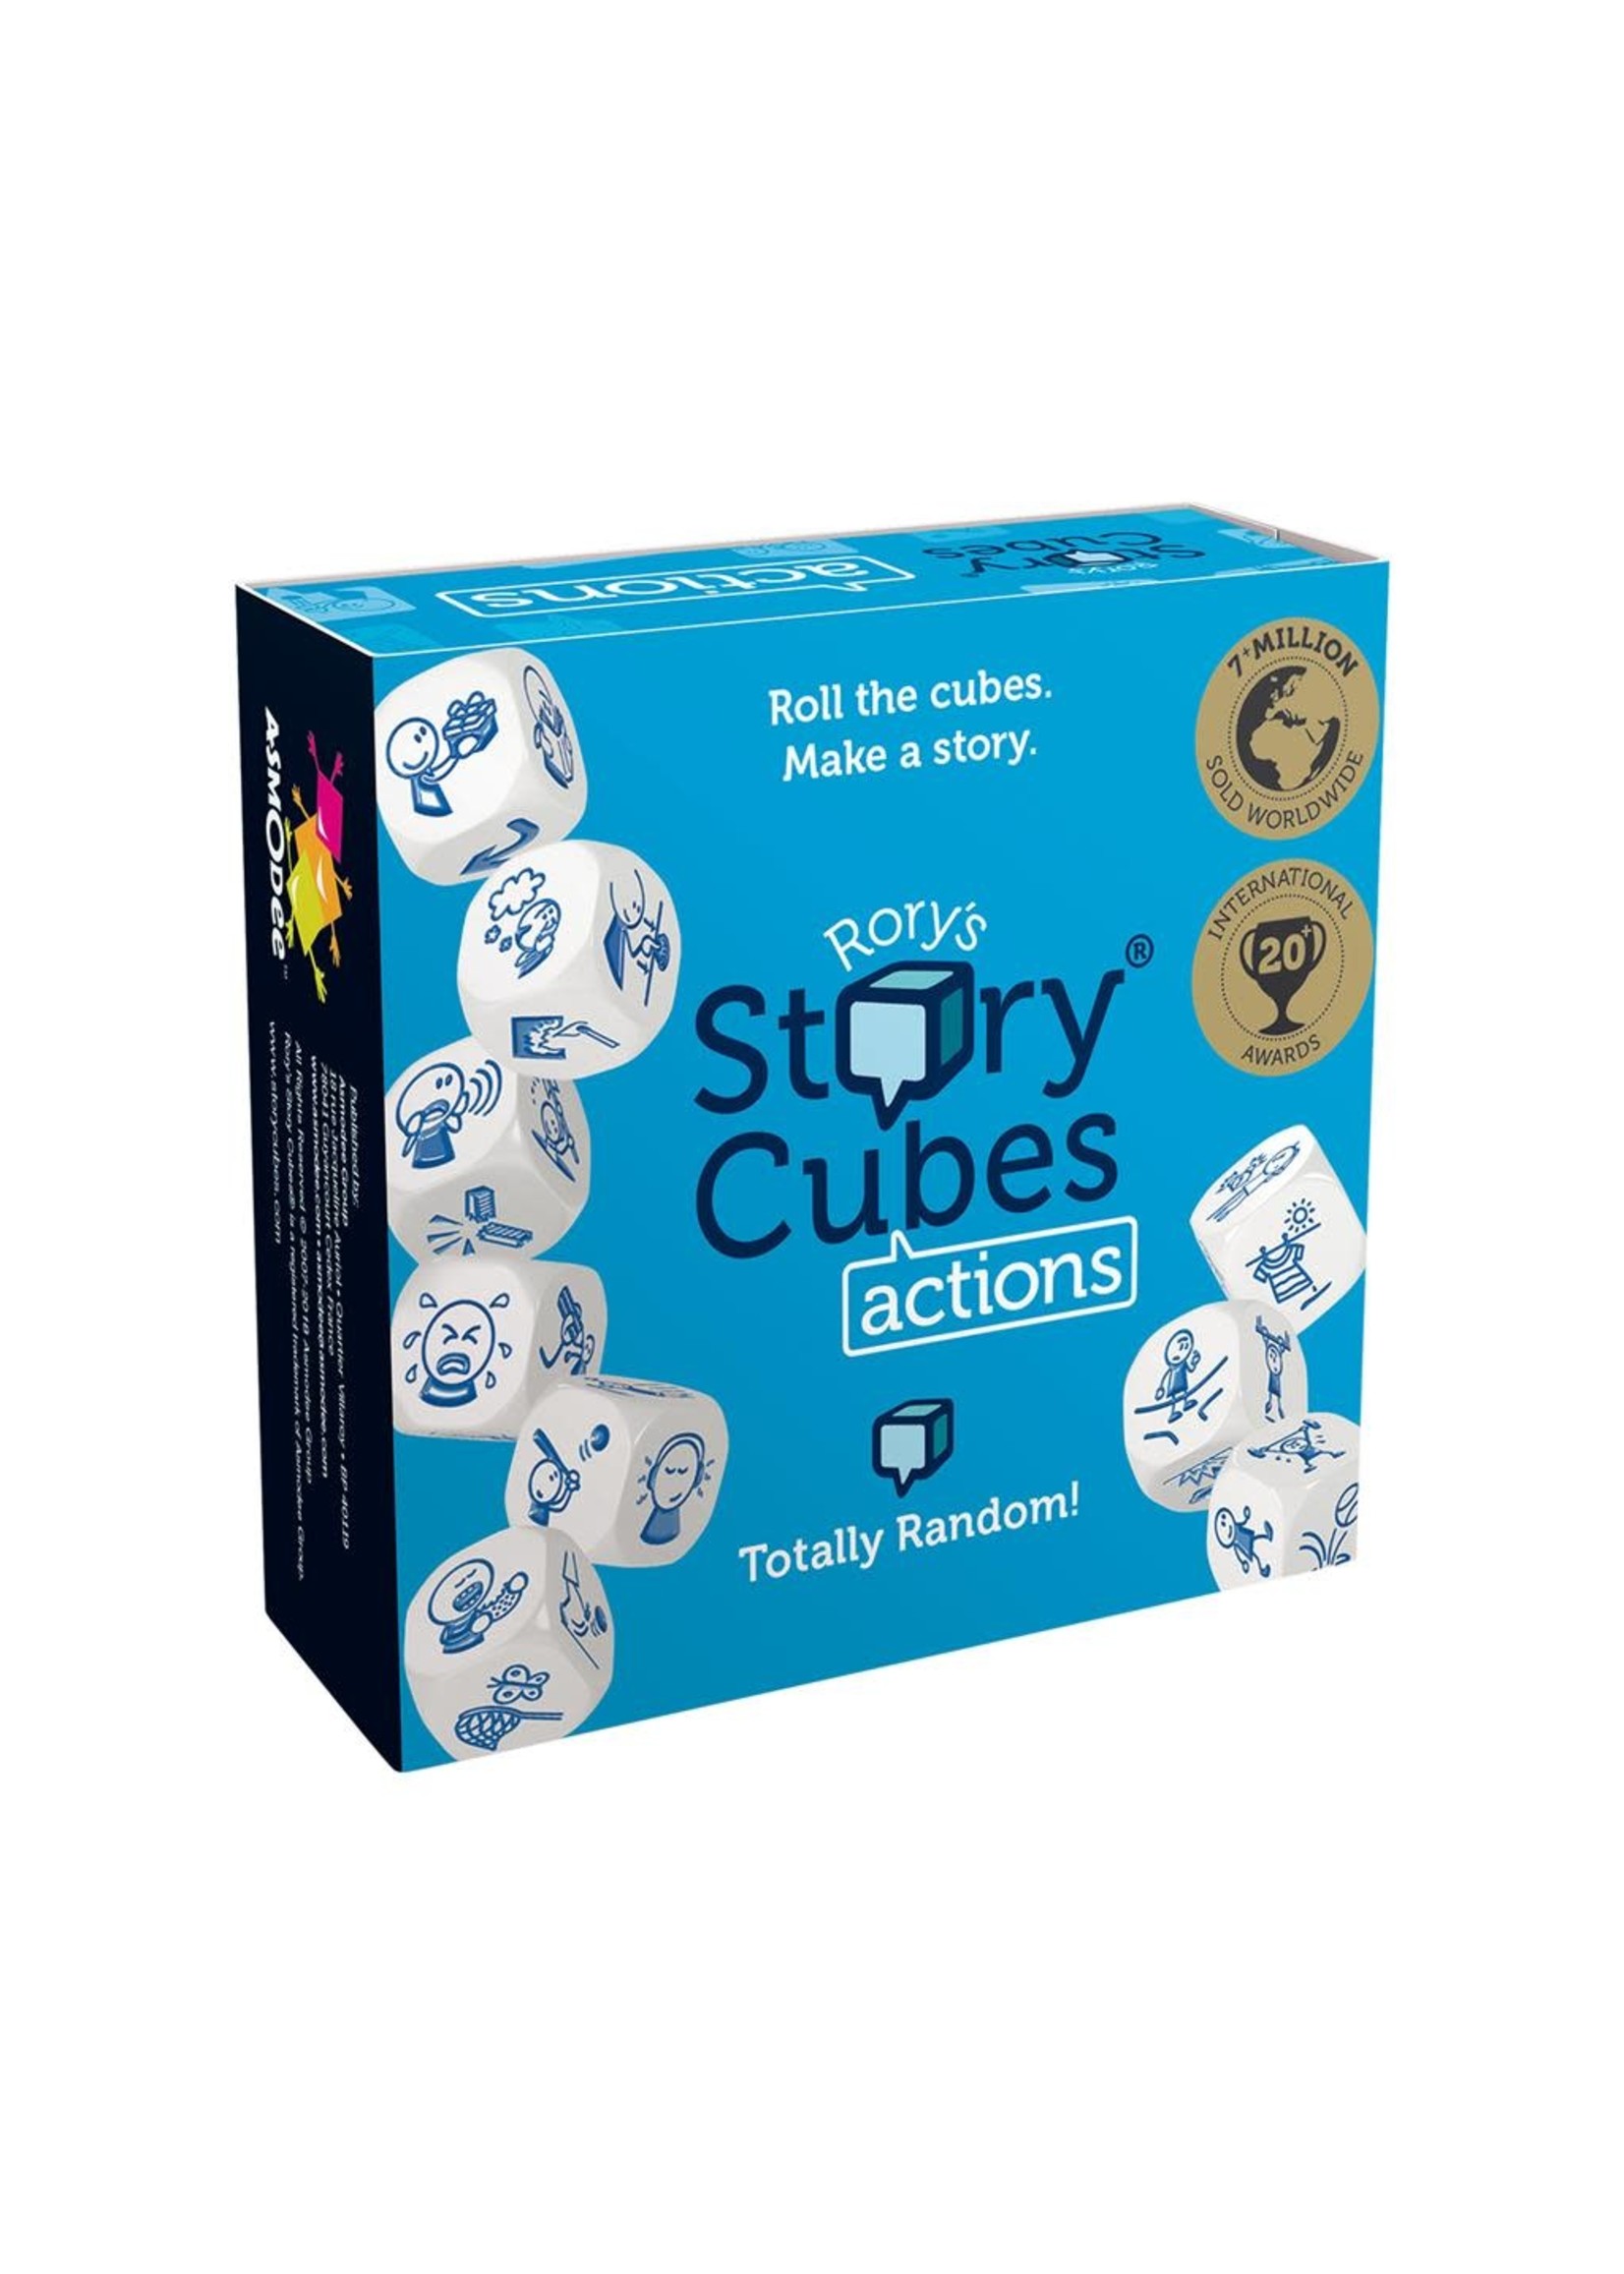 Zygomatic Rory's Story Cubes: Actions (Box)